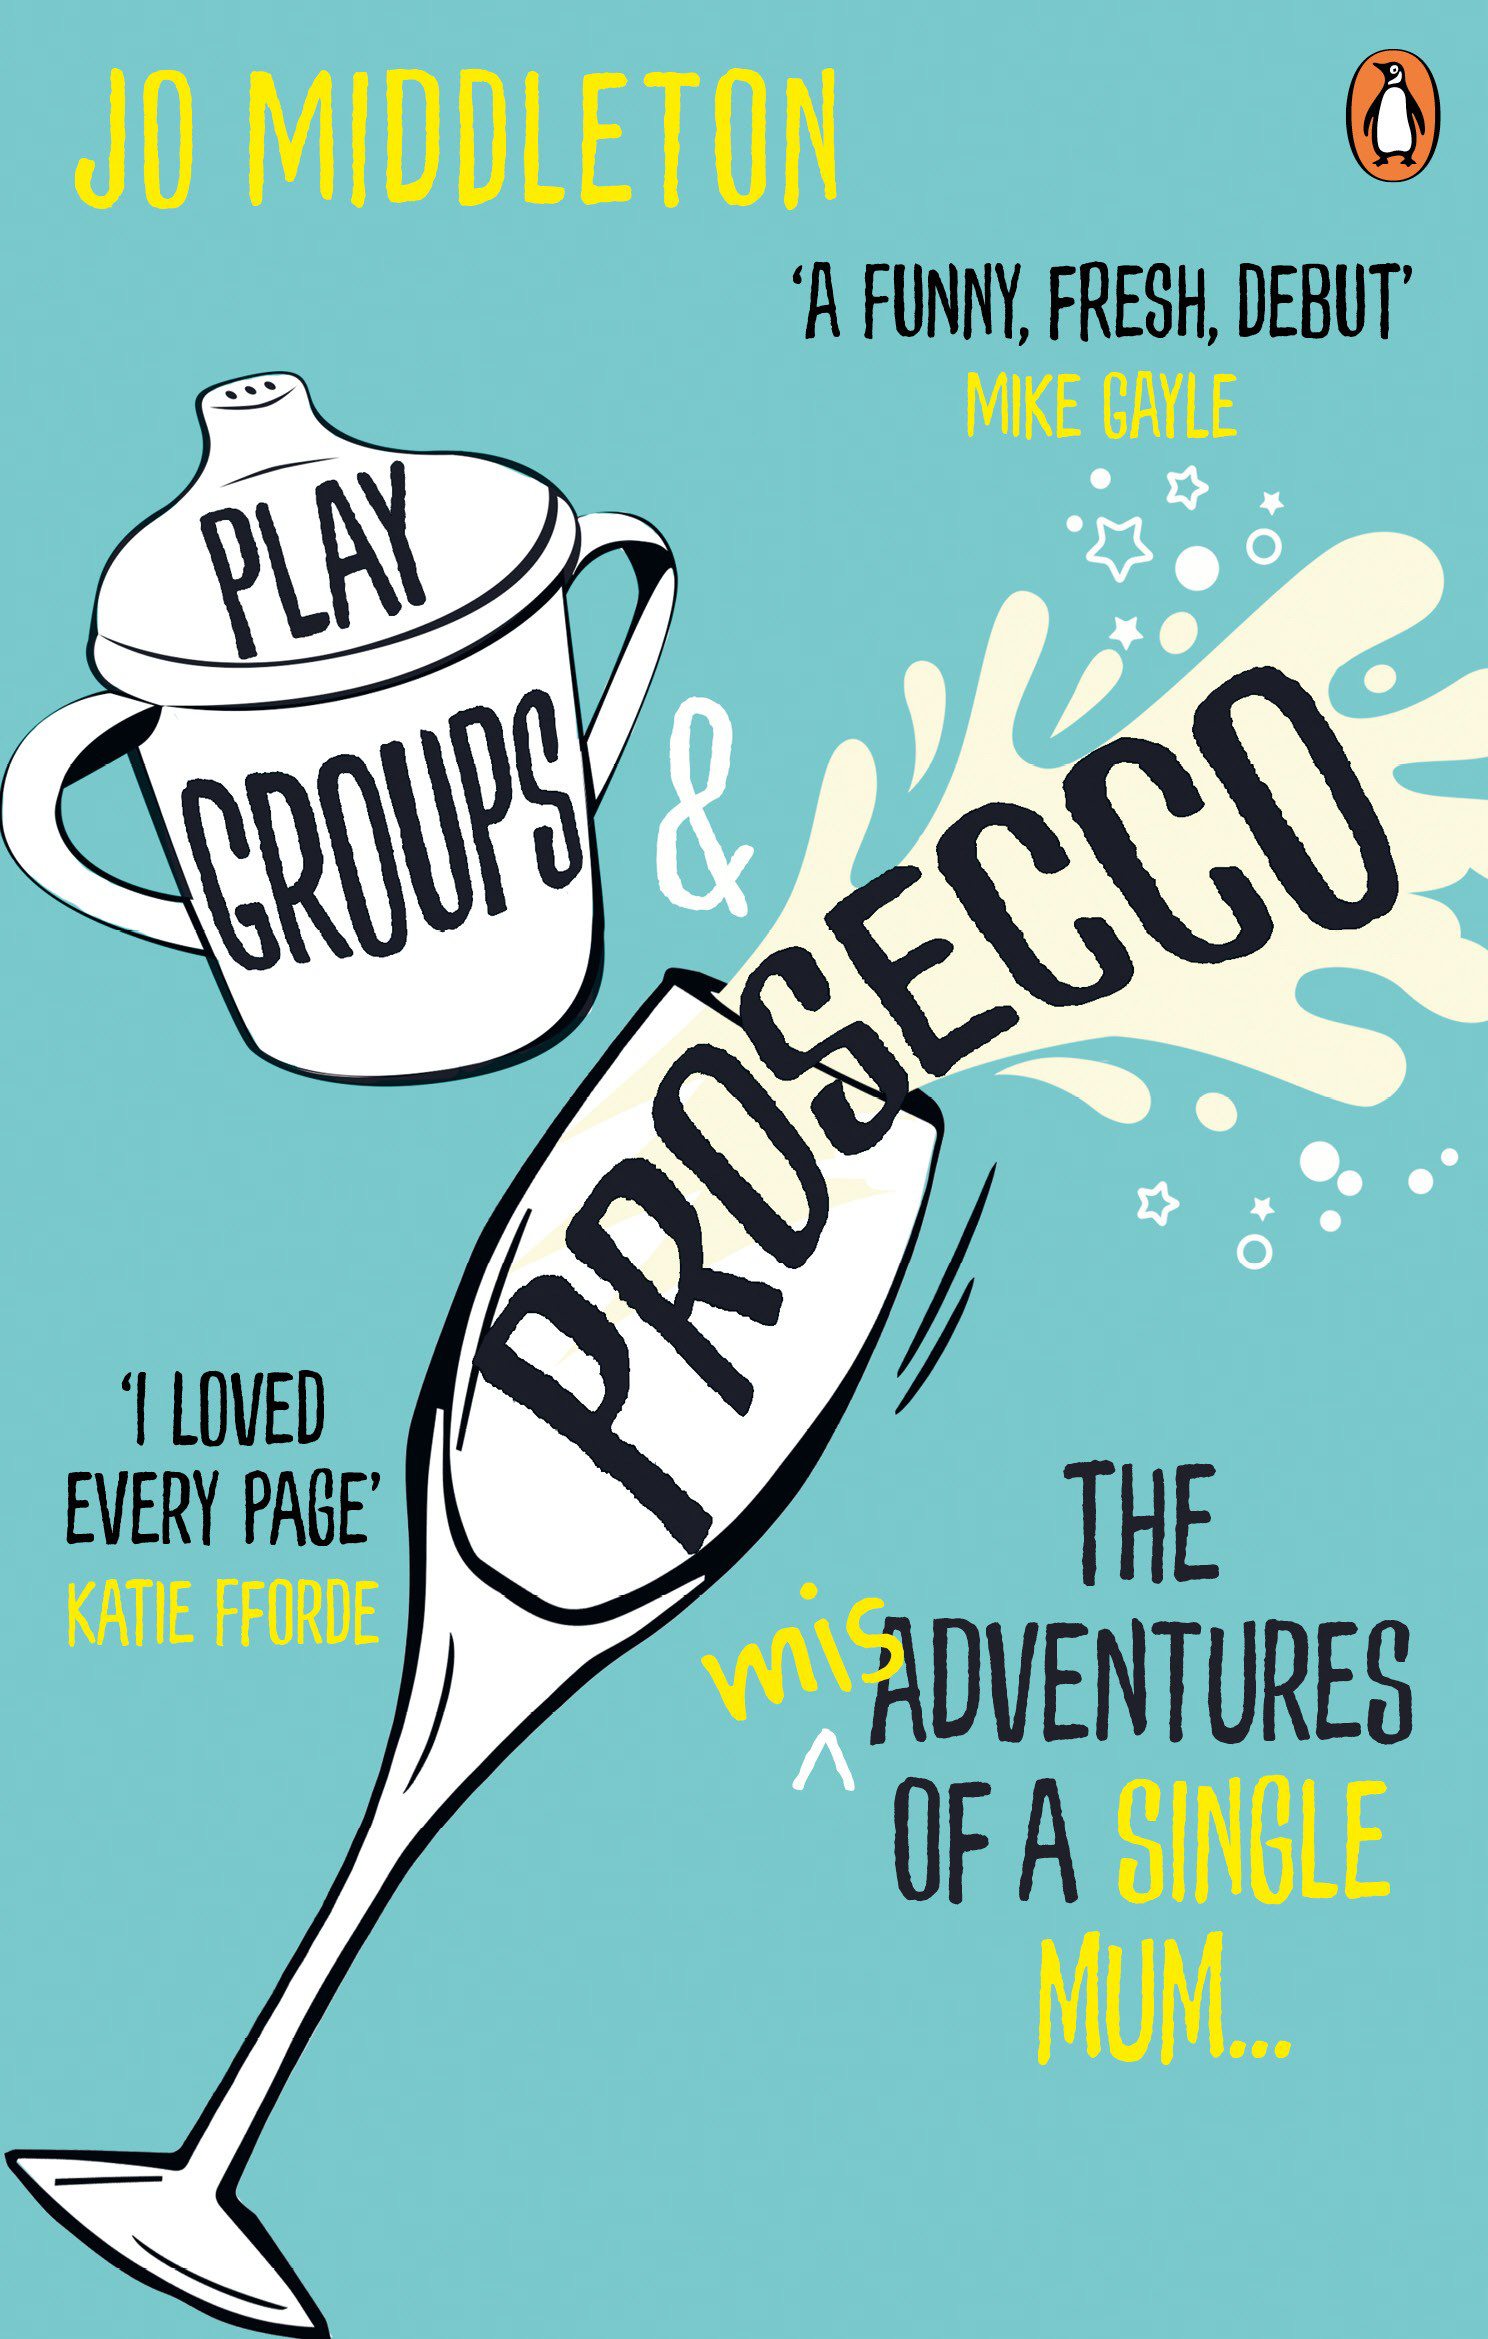 Playgroups and prosecco Jo Middleton